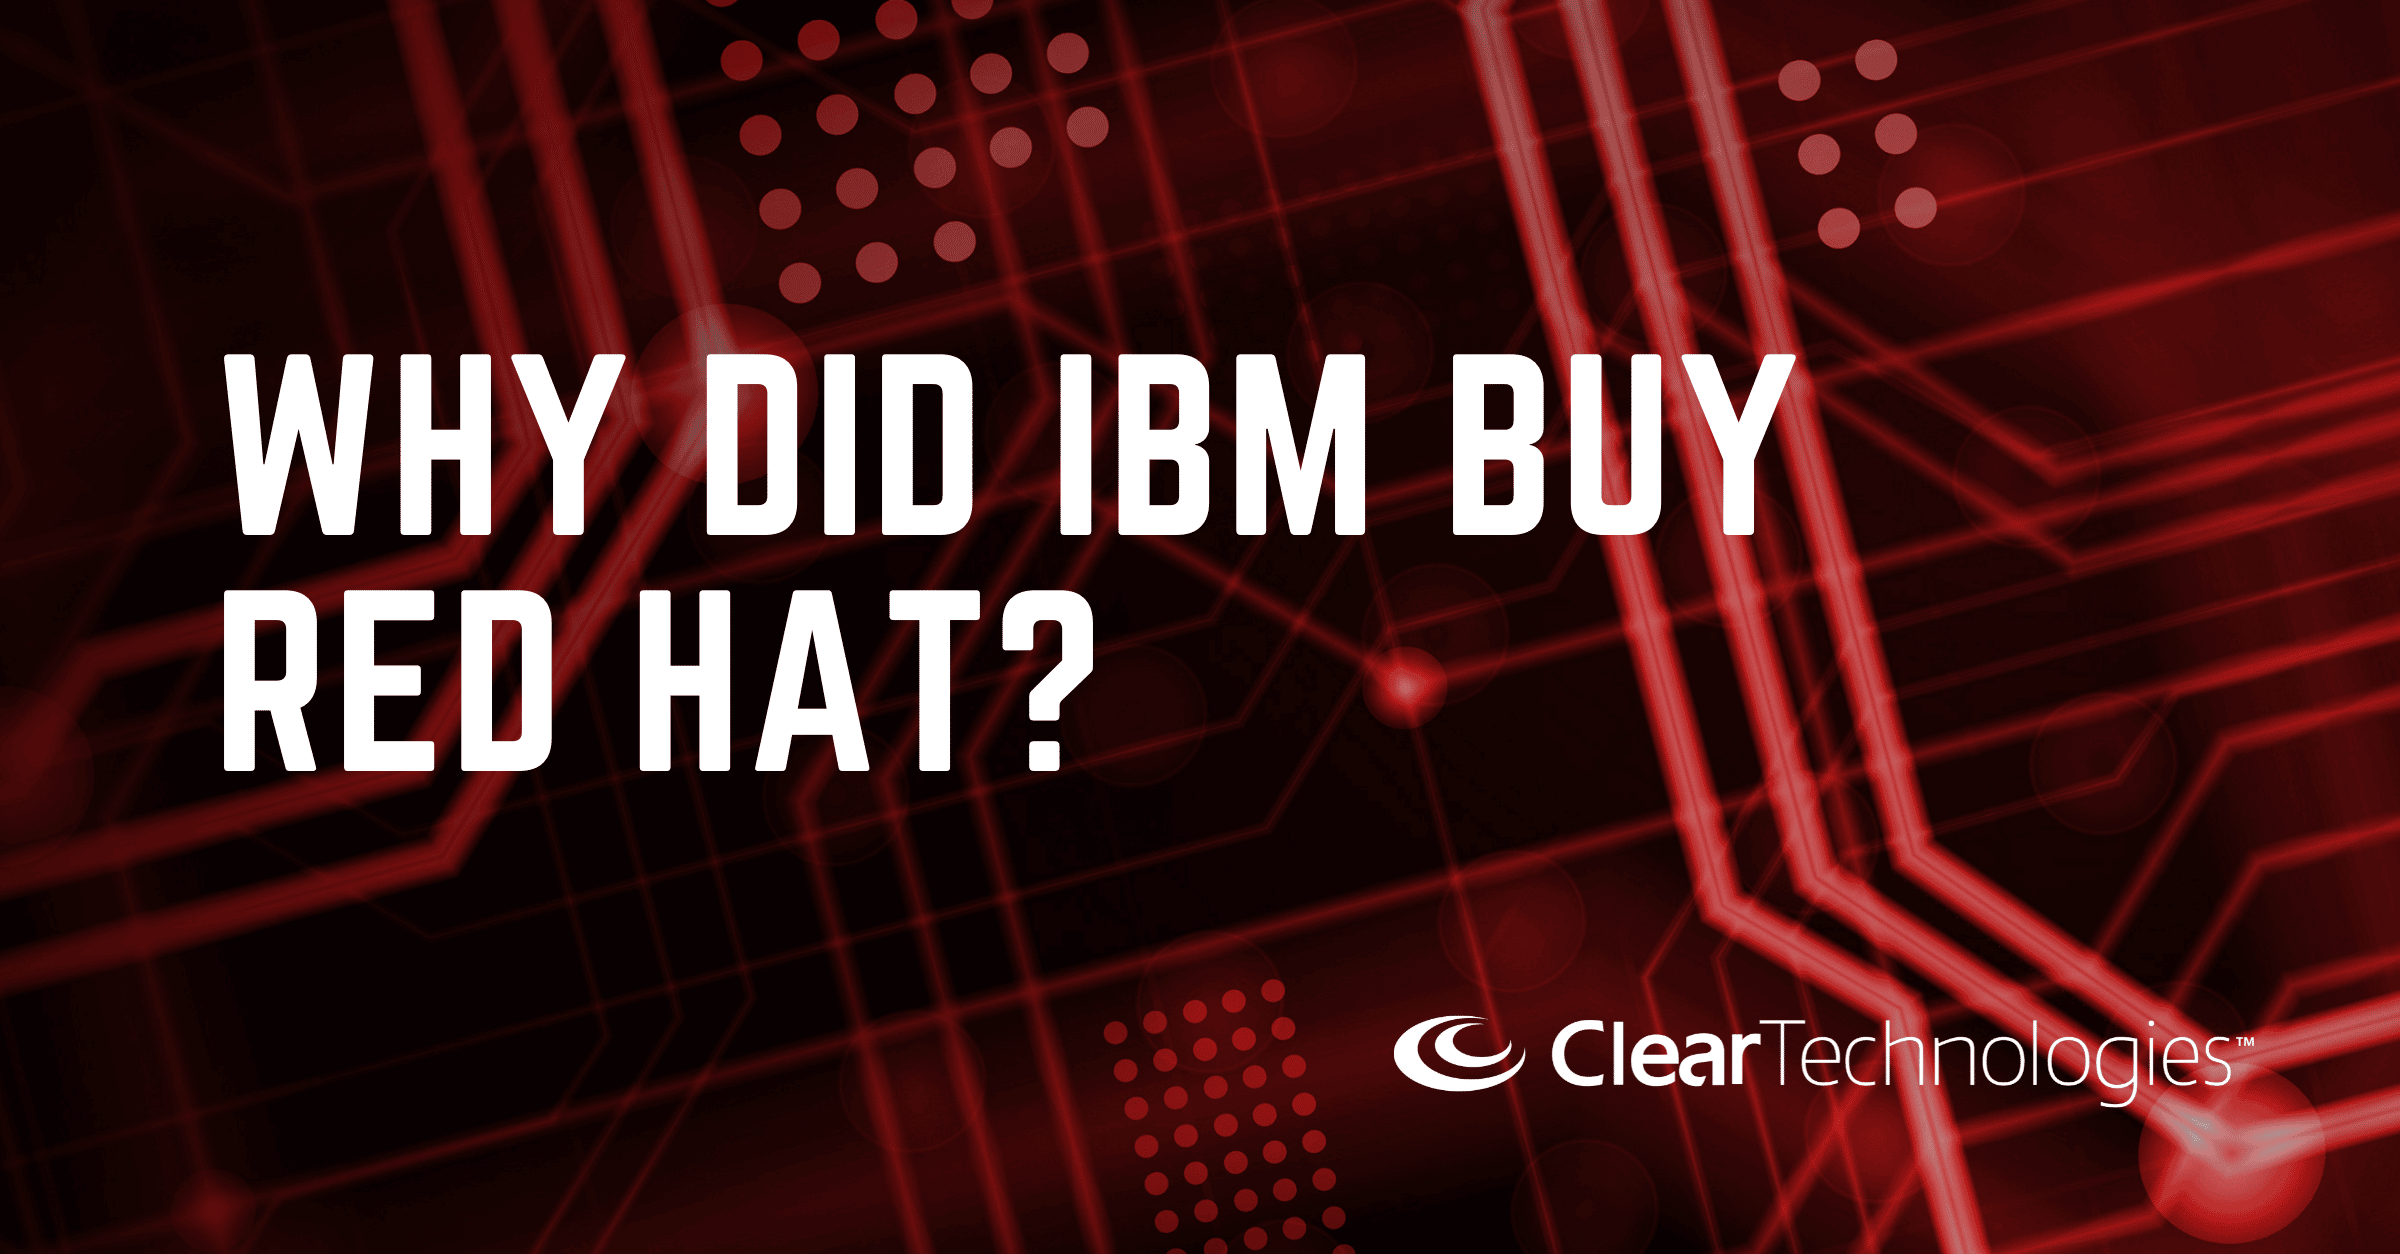 Why did IBM buy Red Hat?